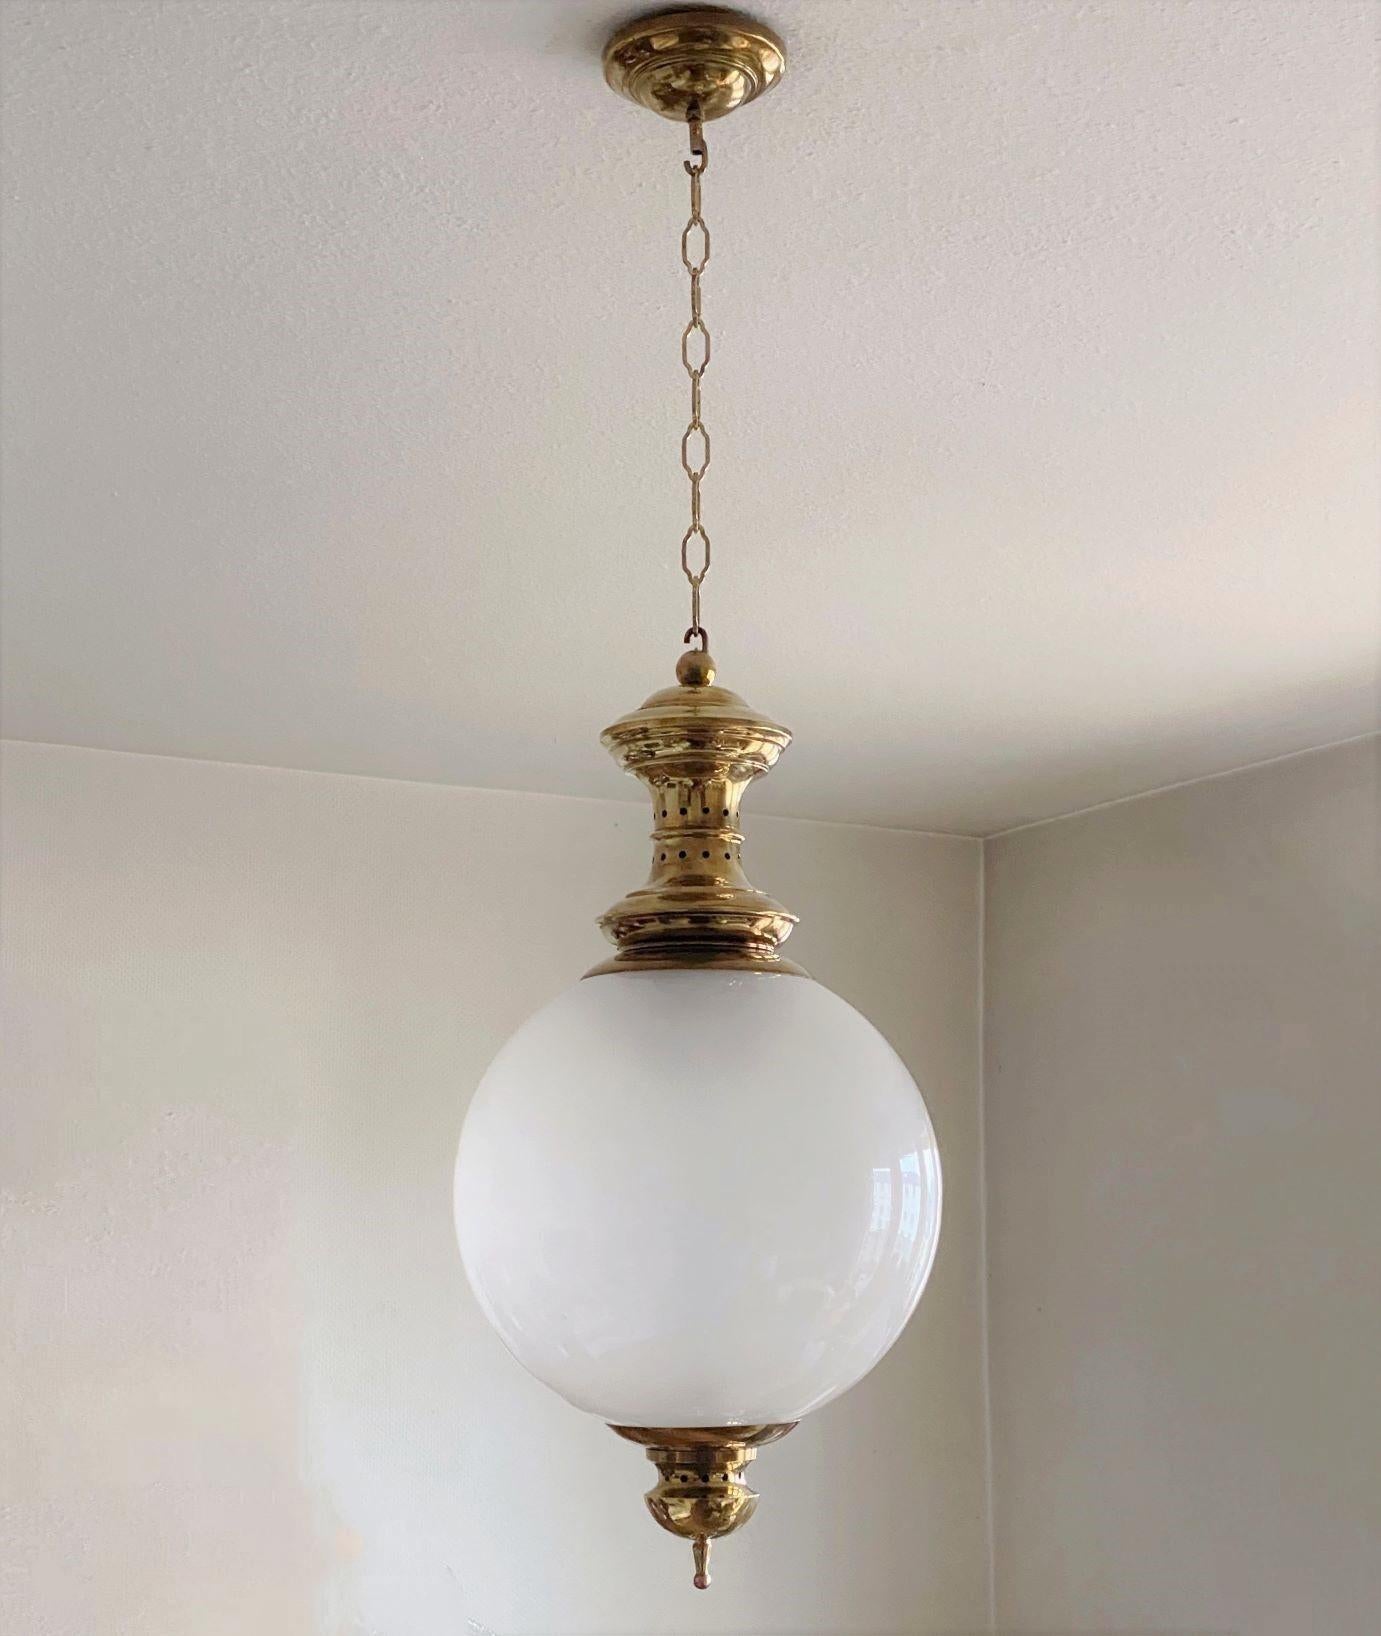 A refined three-light pendant by the famous Italian artist and designer Luigi Caccia Dominioni, Italy, 1950. Large-sized lamp of hand blown opalescent glass and brass. The Model LS1 was designed and manufactured exclusively for the renowned Azucena